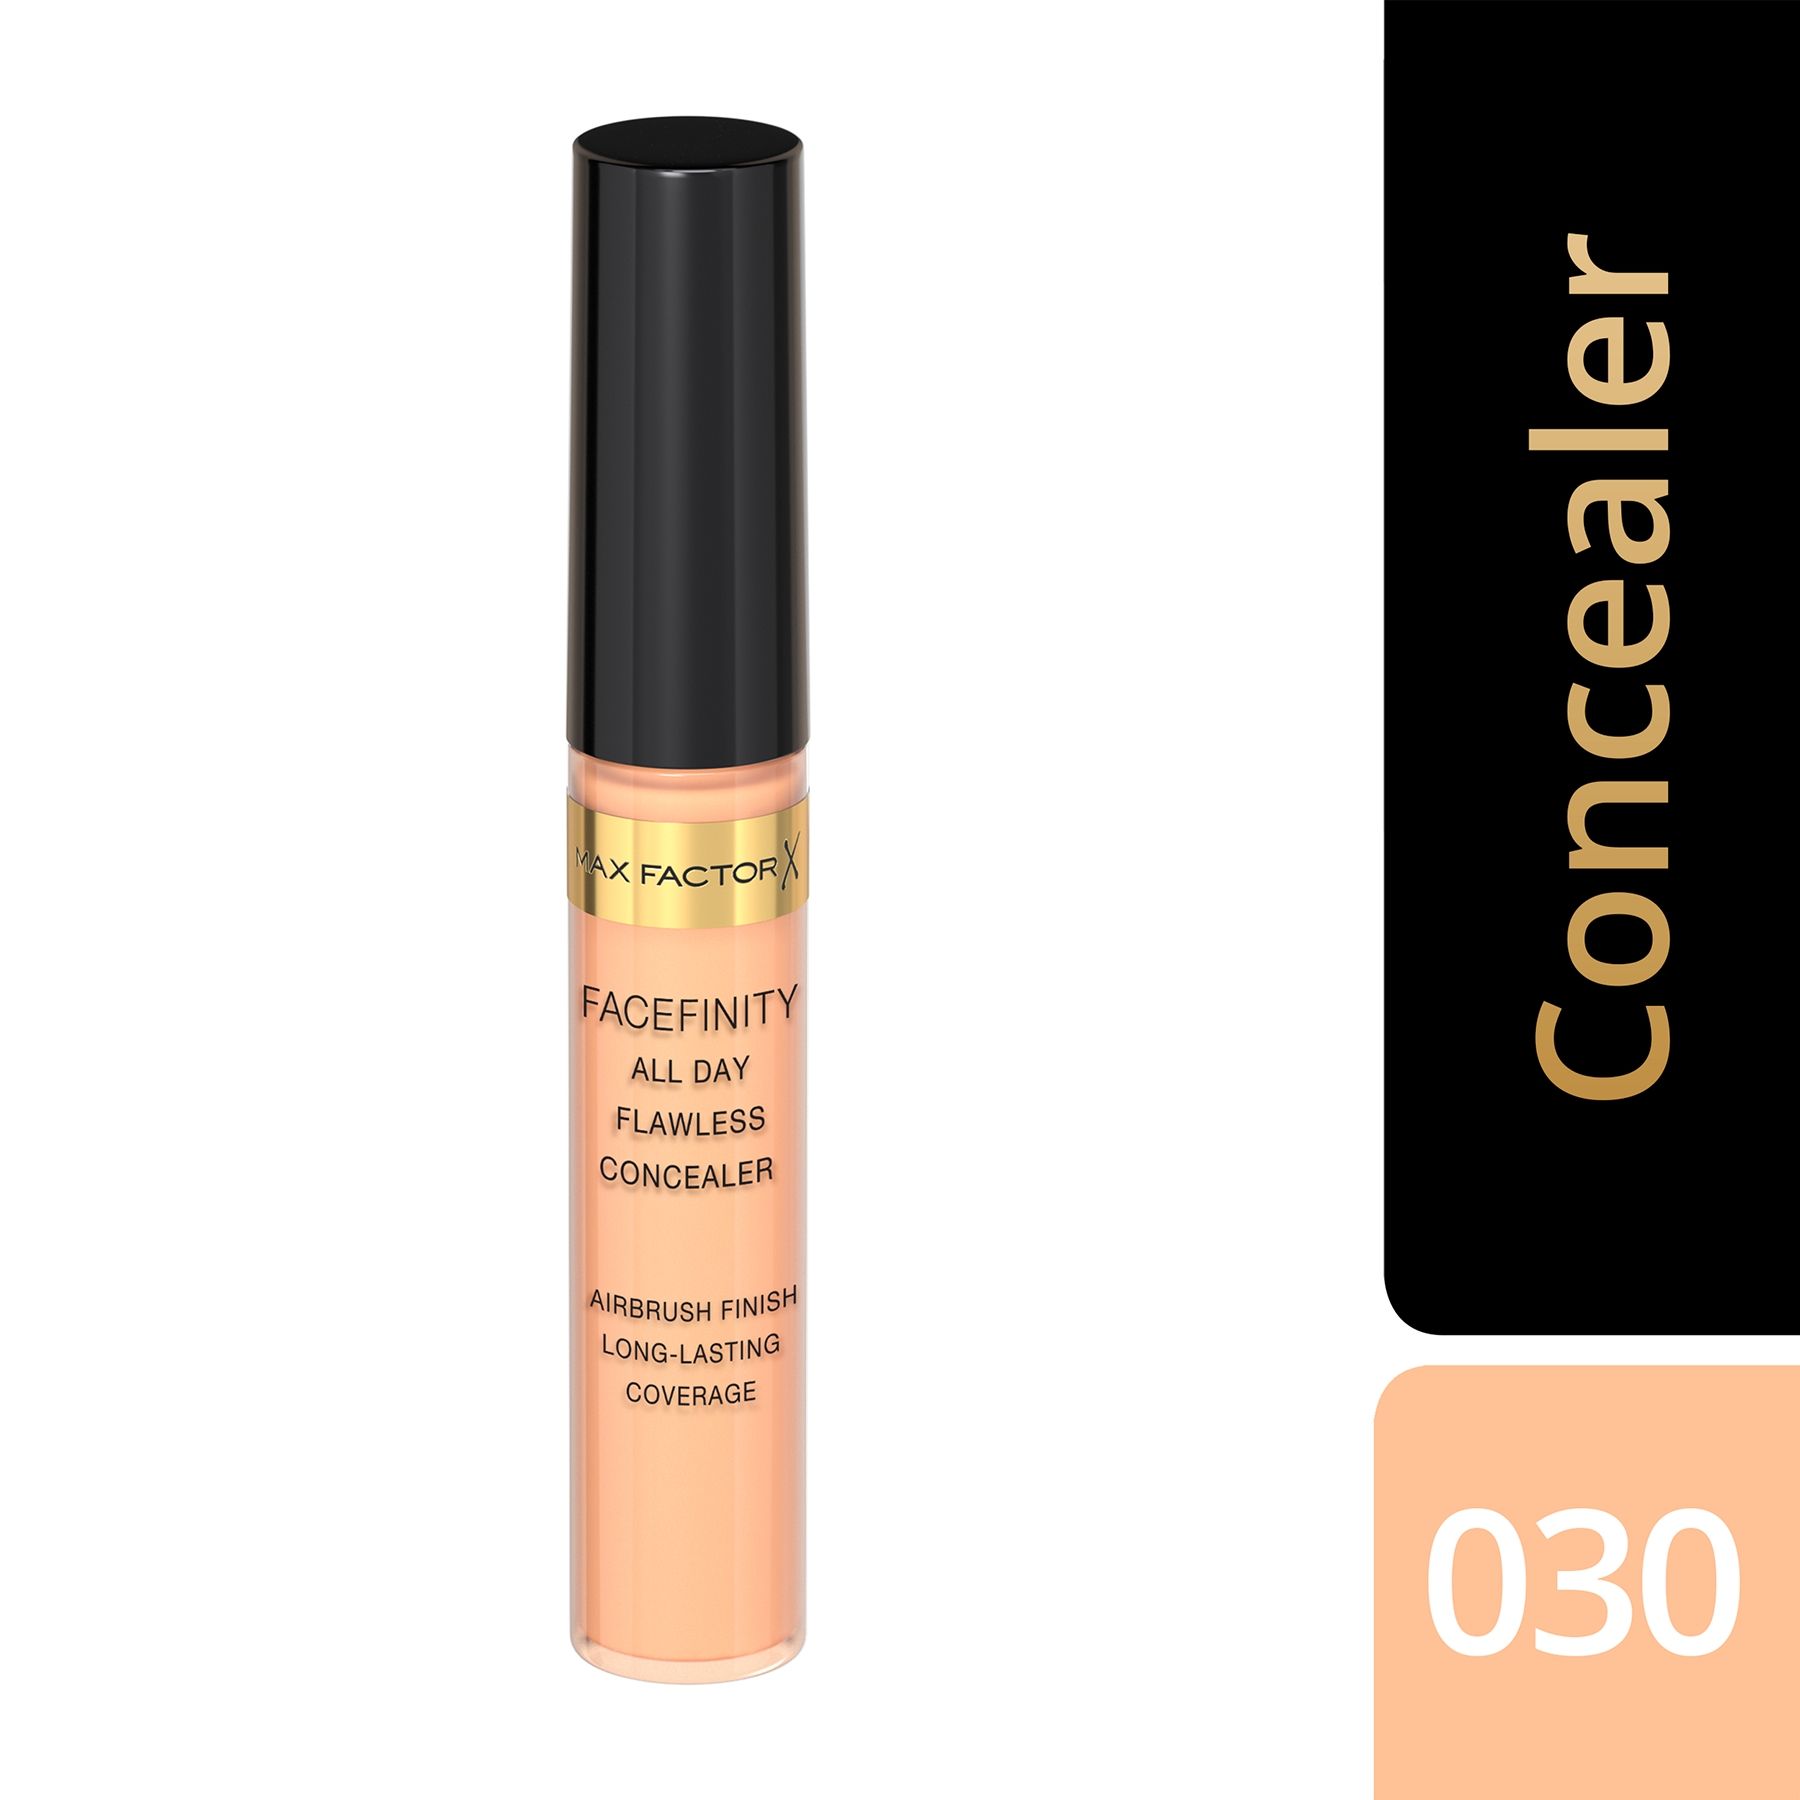 Buy Max Factor Facefinity All Day Concealer Online